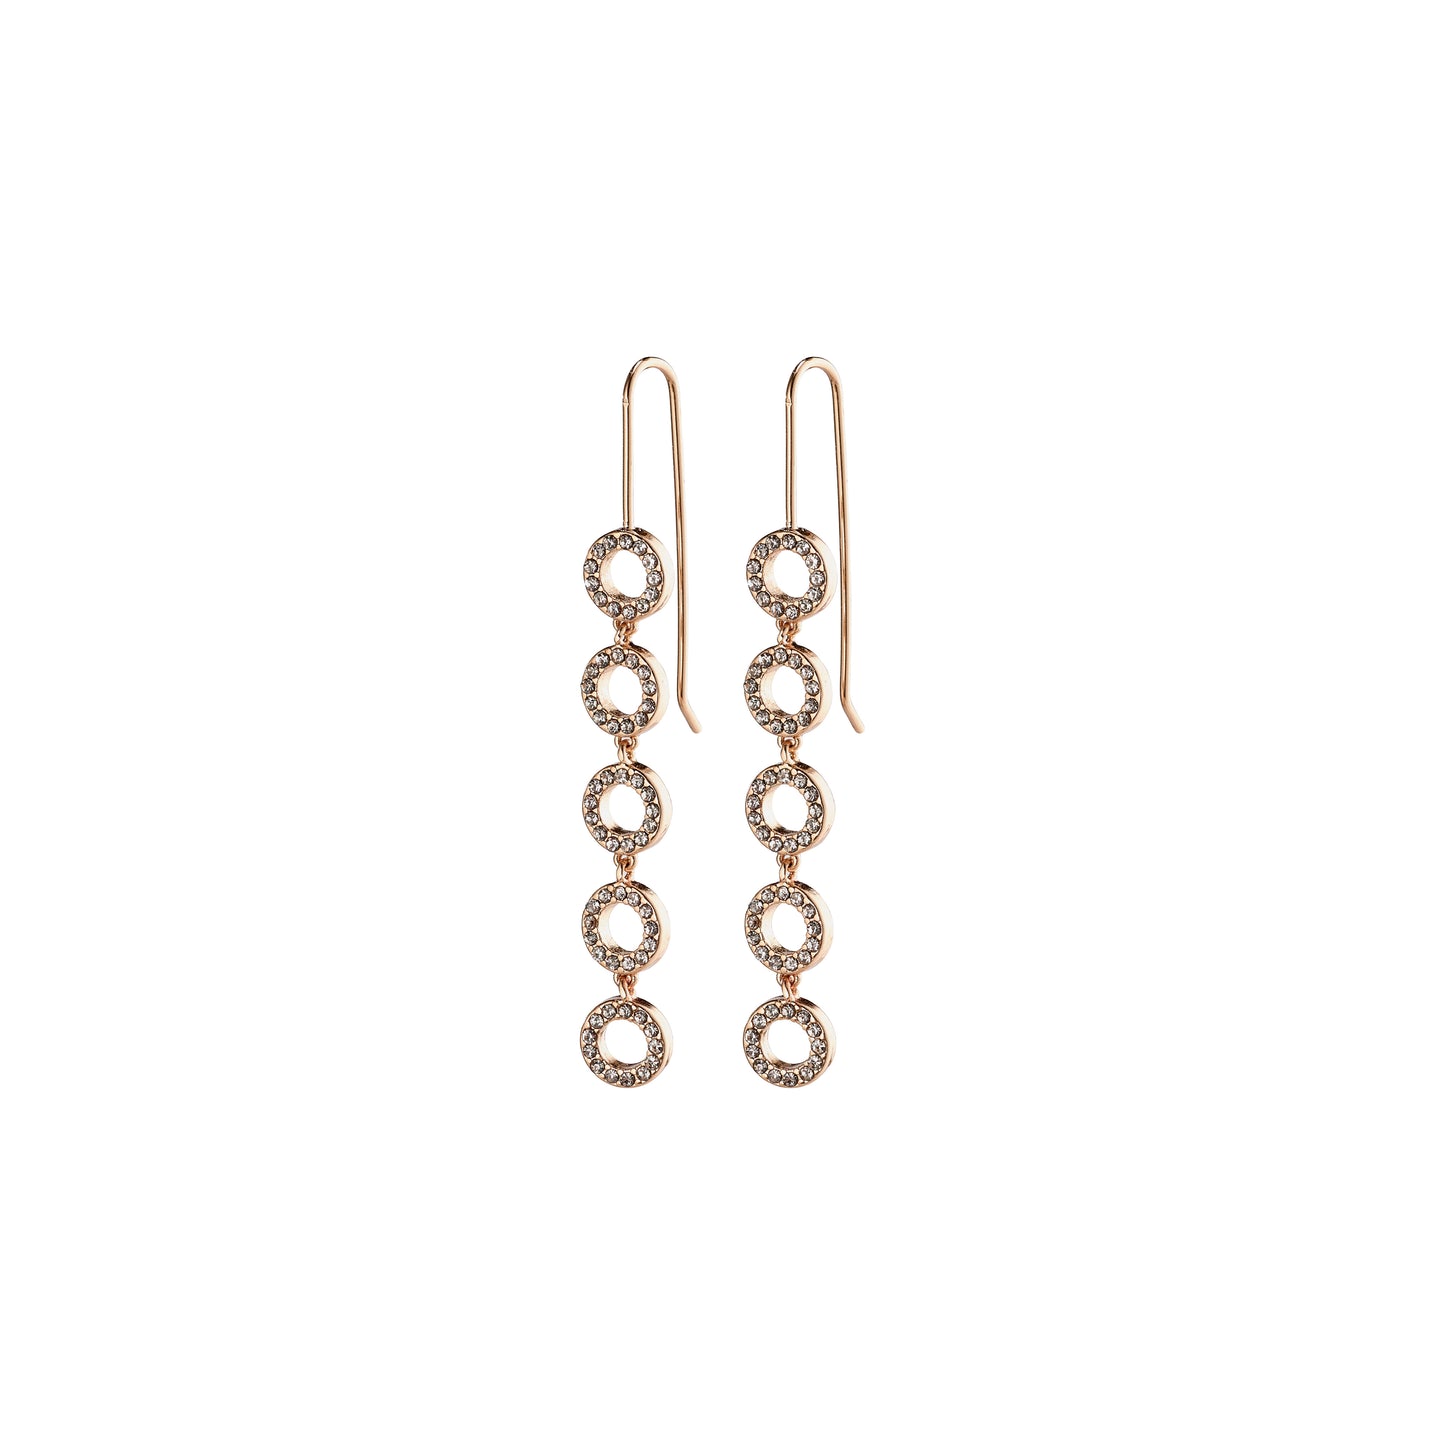 Earrings : Tessa : Rose Gold Plated : Crystal